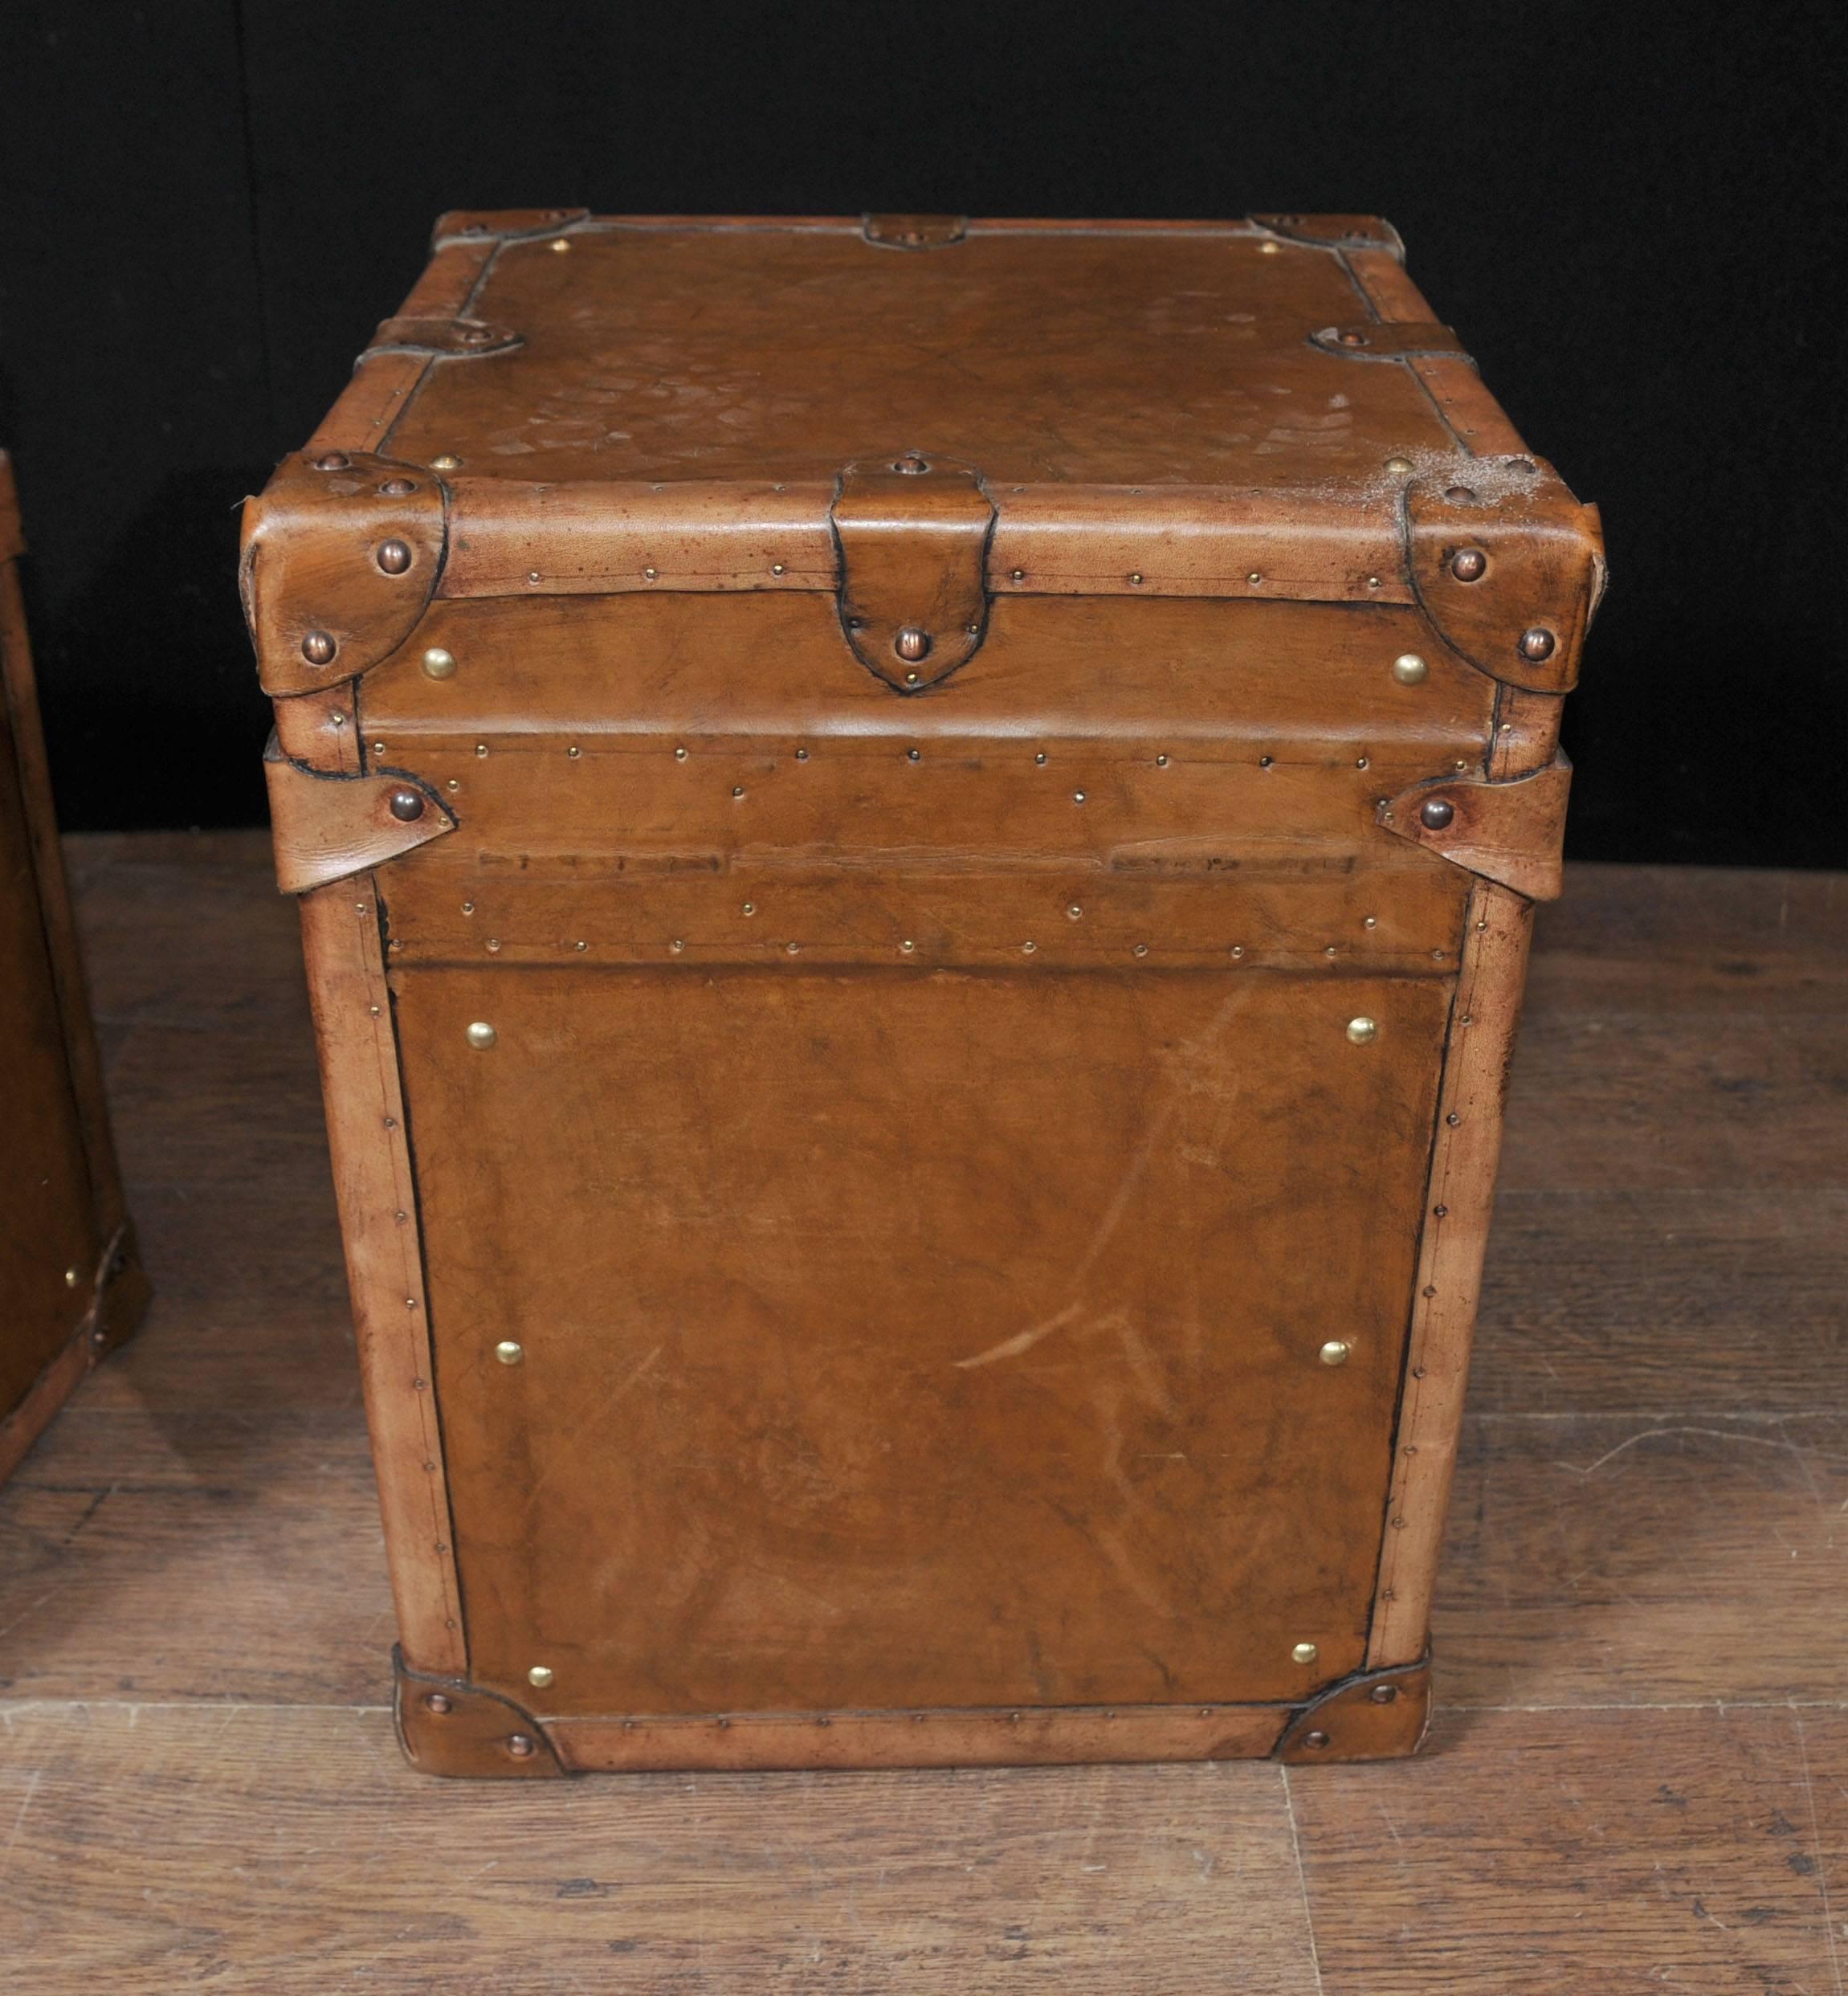 Gorgeous pair of English leather steamer trunk boxes.
Perfect as a pair of side tables, these are every interior designers dream.
Lovely antiqued leather finish and boxes open out to reveal ample storage.
All handles and straps in same